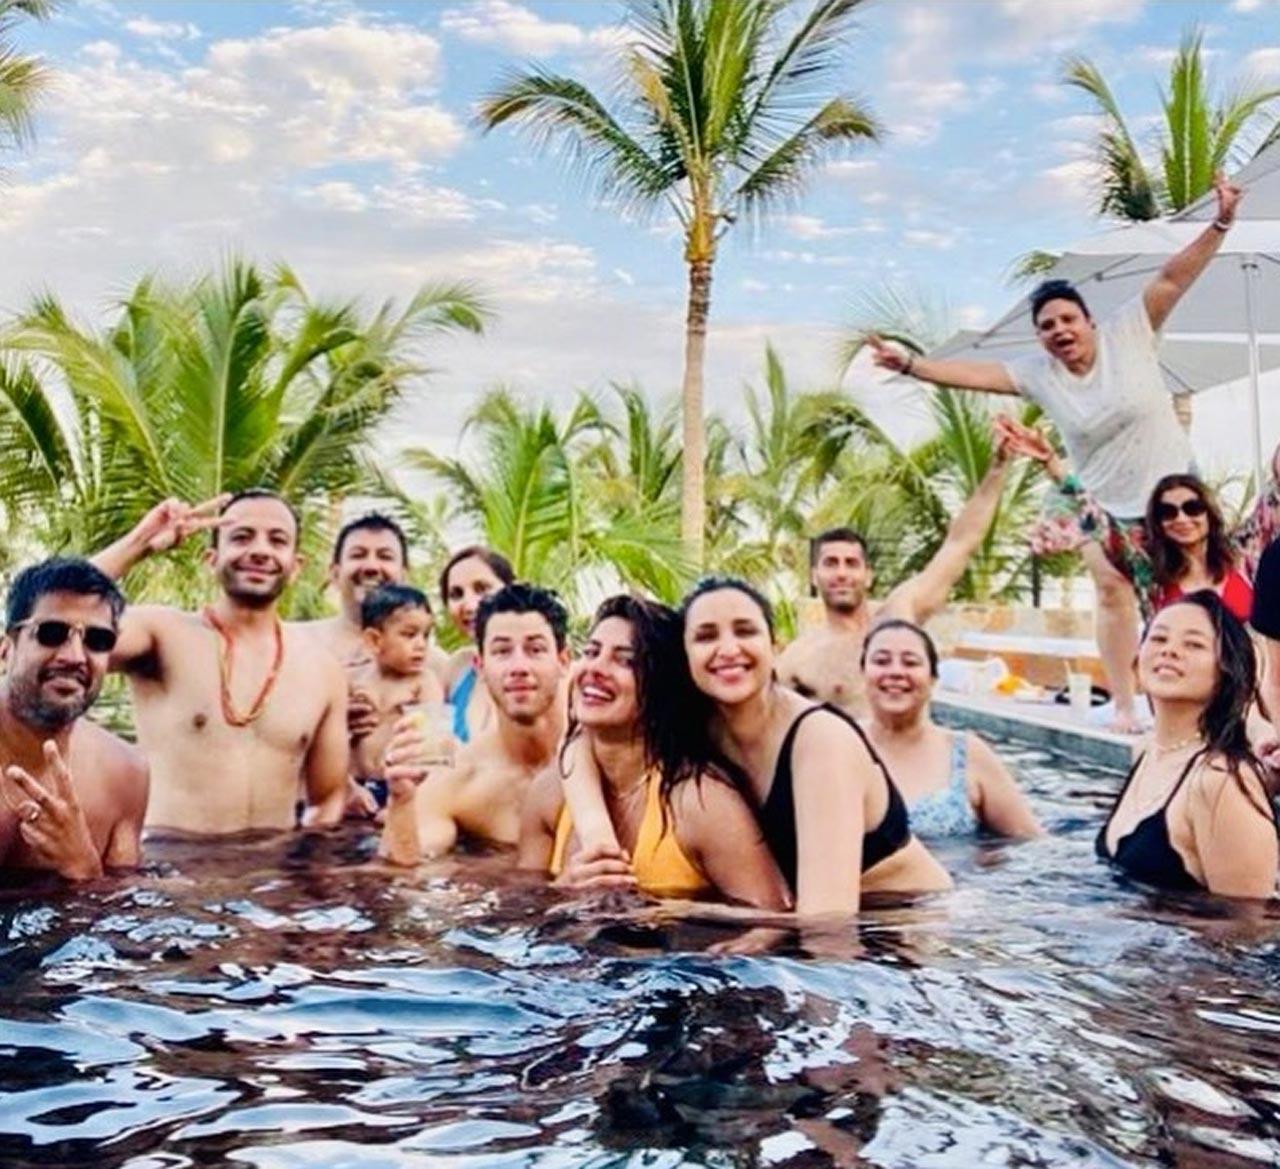 In one of the pictures, Priyanka, Nick and Parineeti are seen having fun in a pool with their friends. One of the pictures showed Parineeti sitting near a fireplace with Priyanka and others